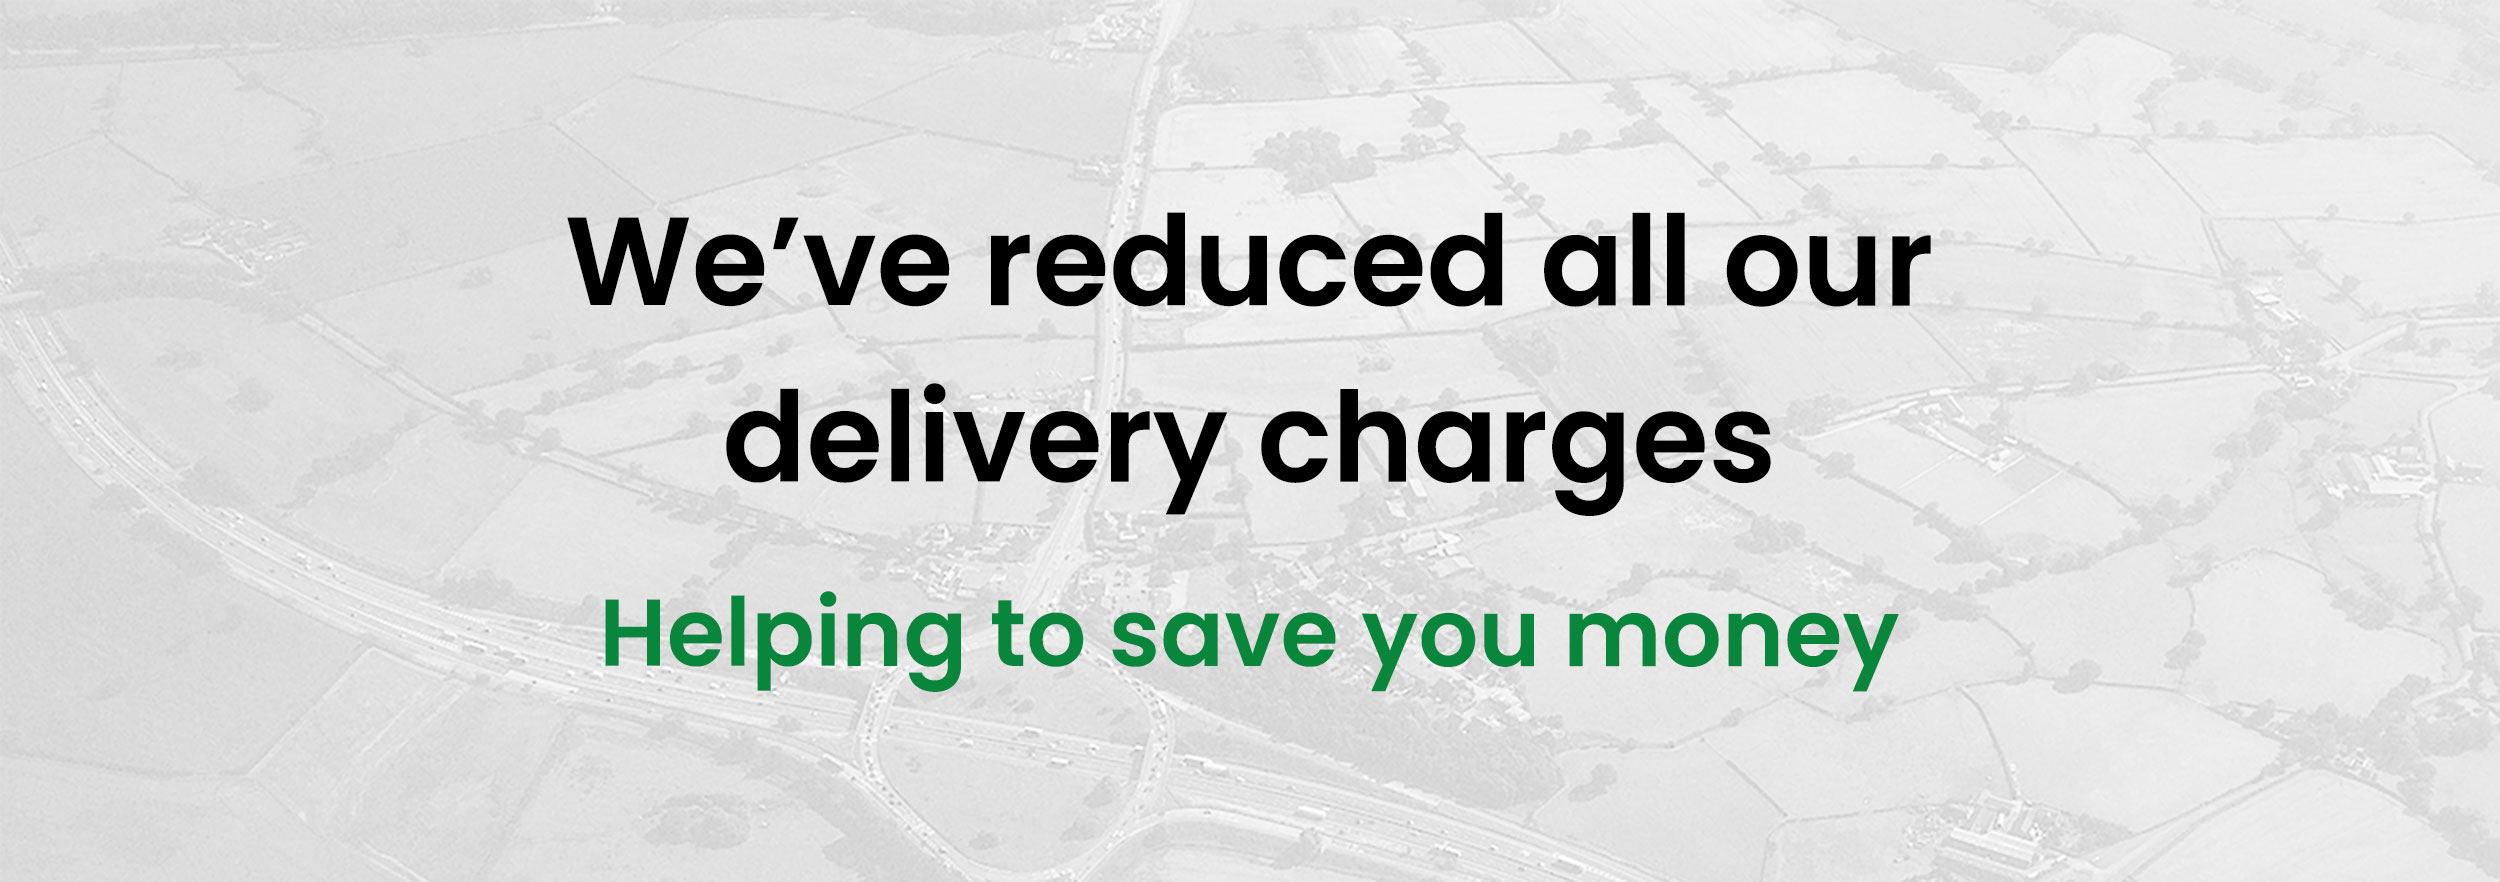 Reduced Delivery Charges